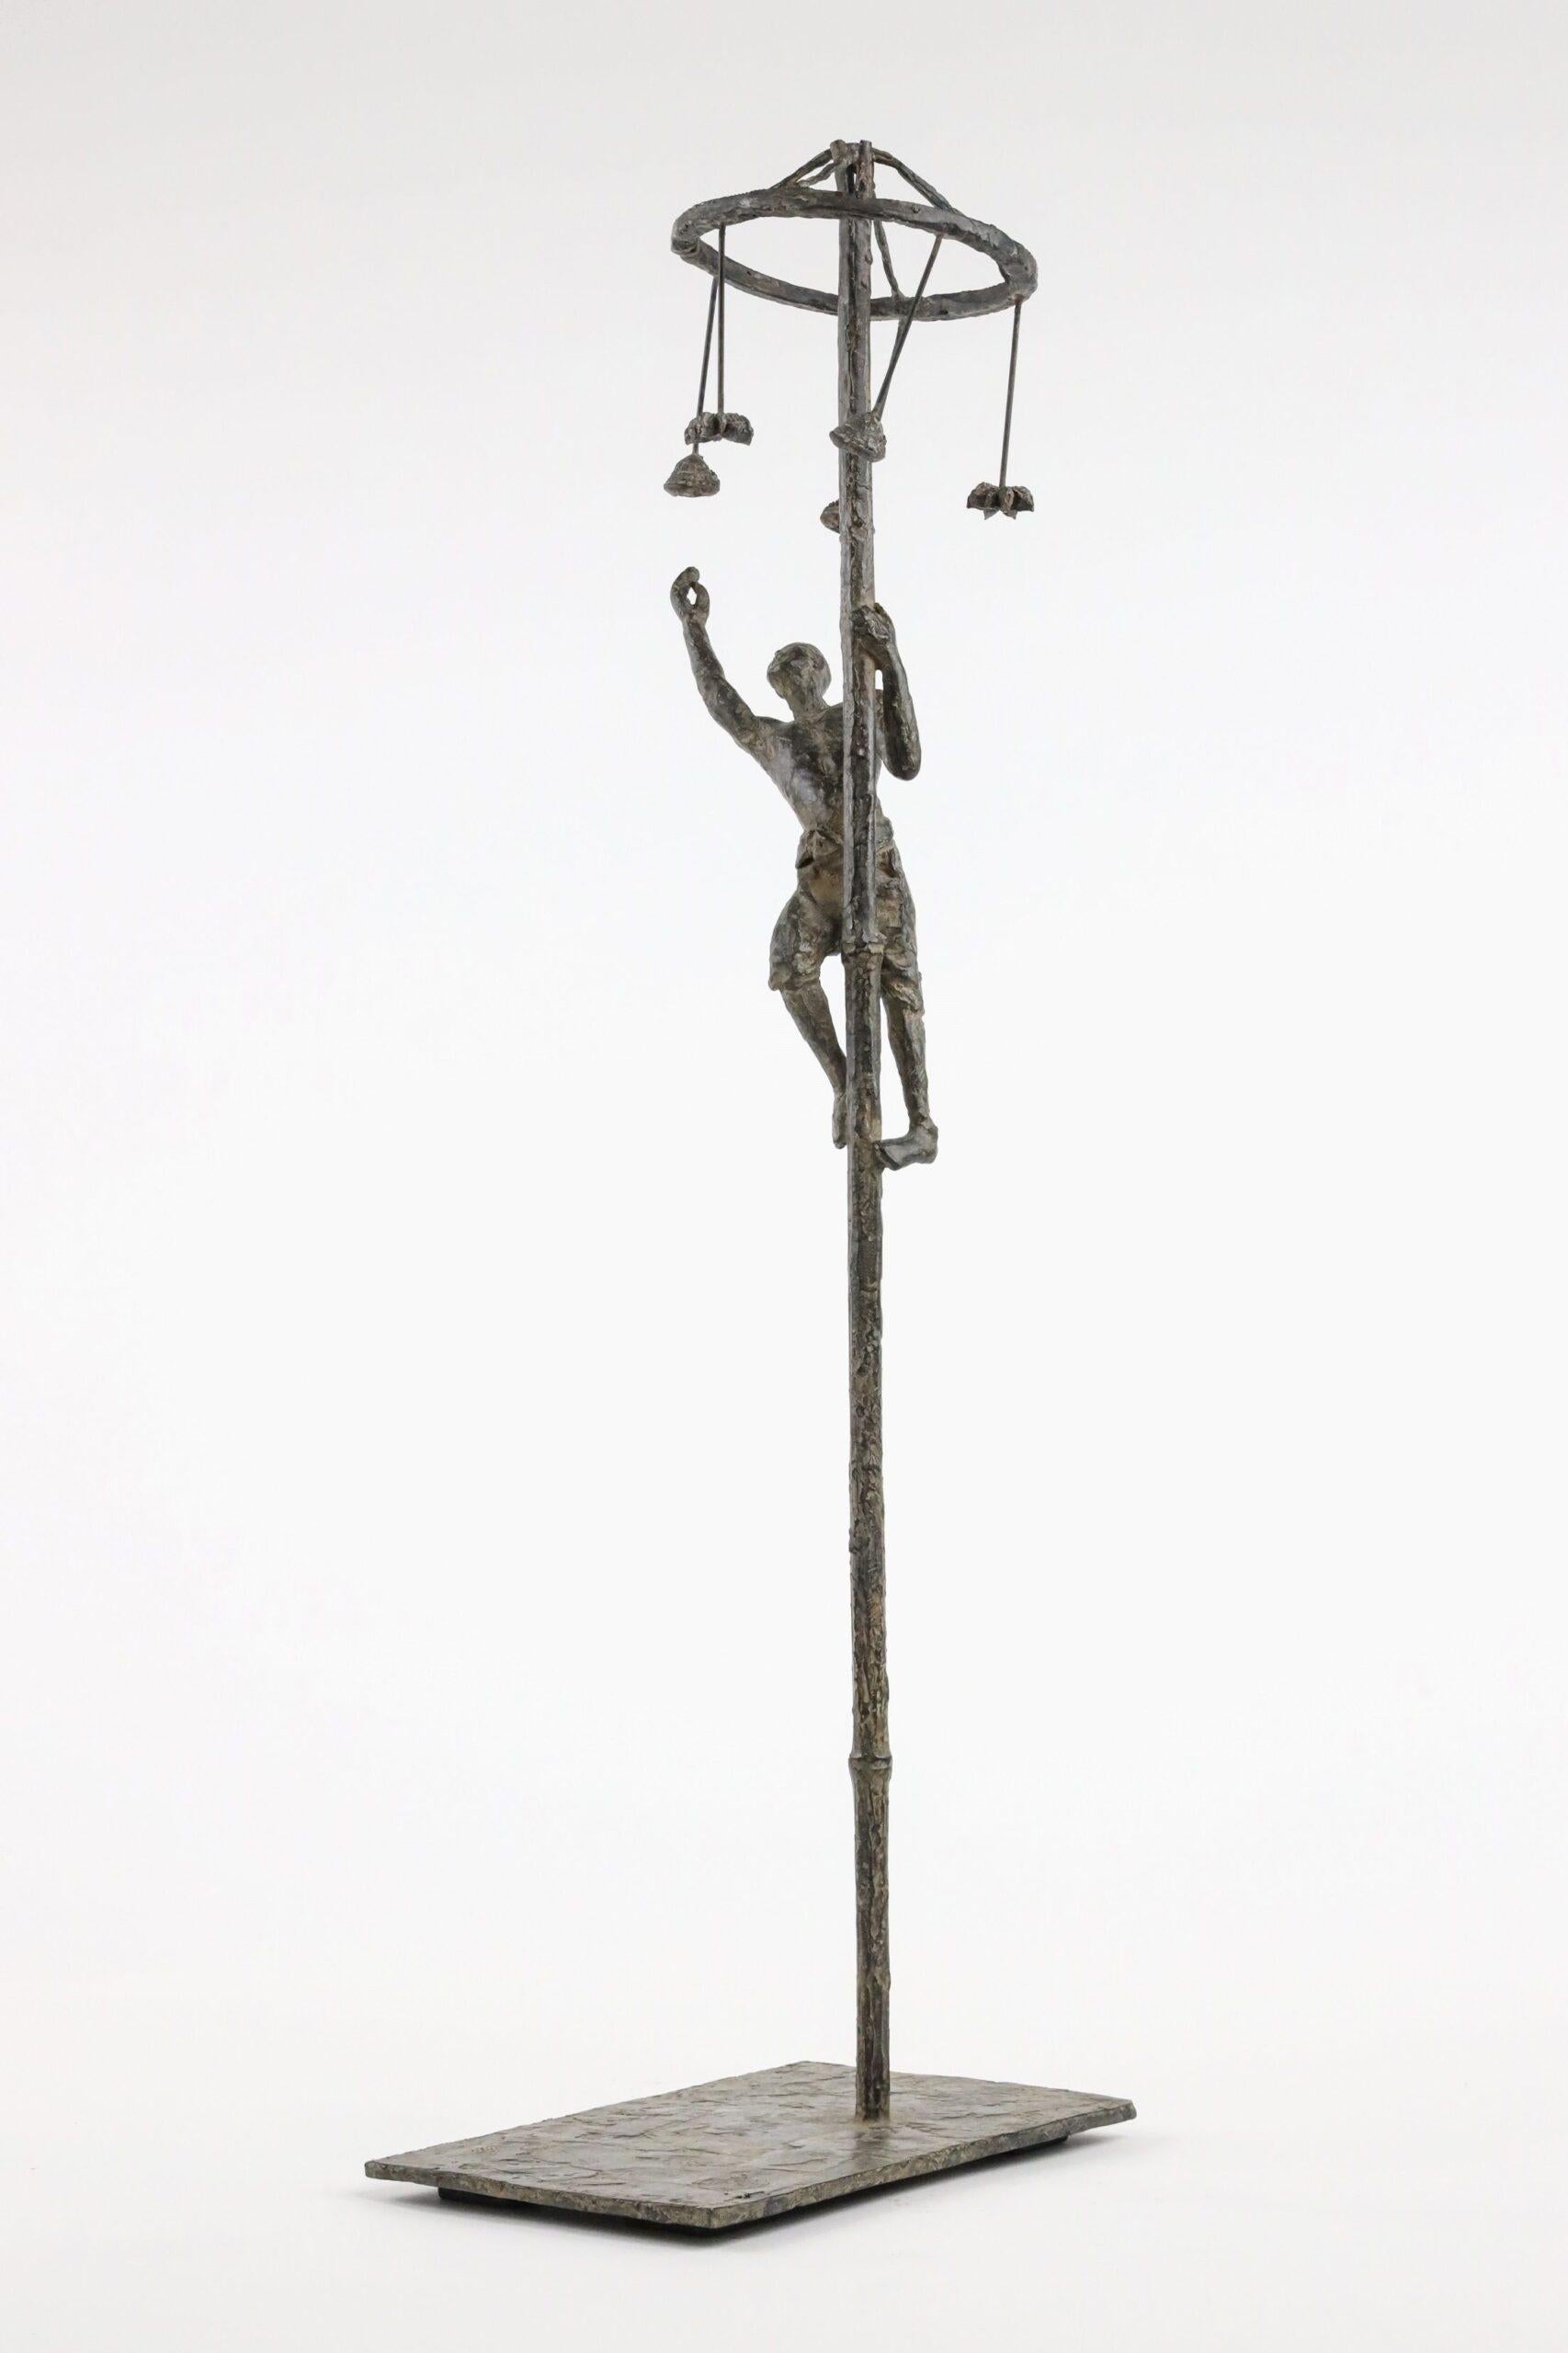 Hope by Marine de Soos - Bronze sculpture, human figure, man, game, tradition For Sale 3